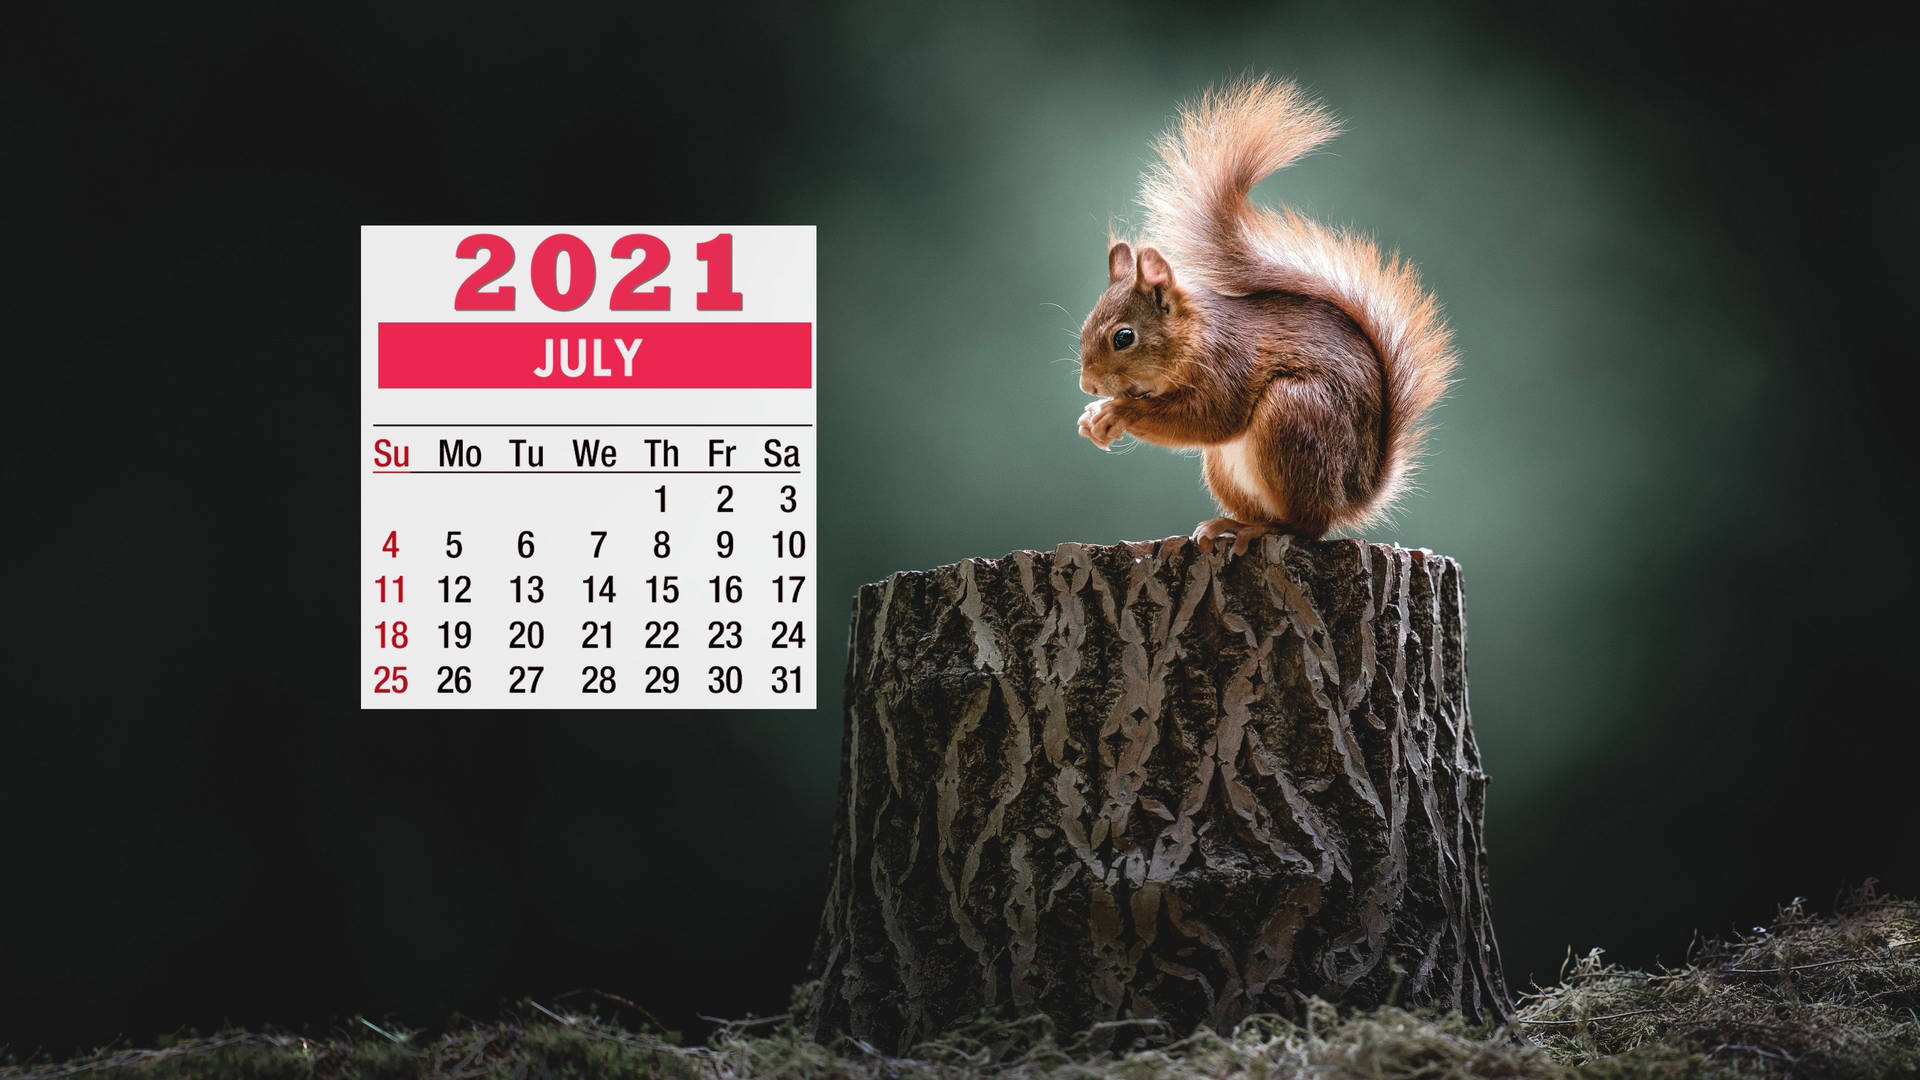 A Squirrel Is Sitting On A Stump With A Calendar Wallpaper